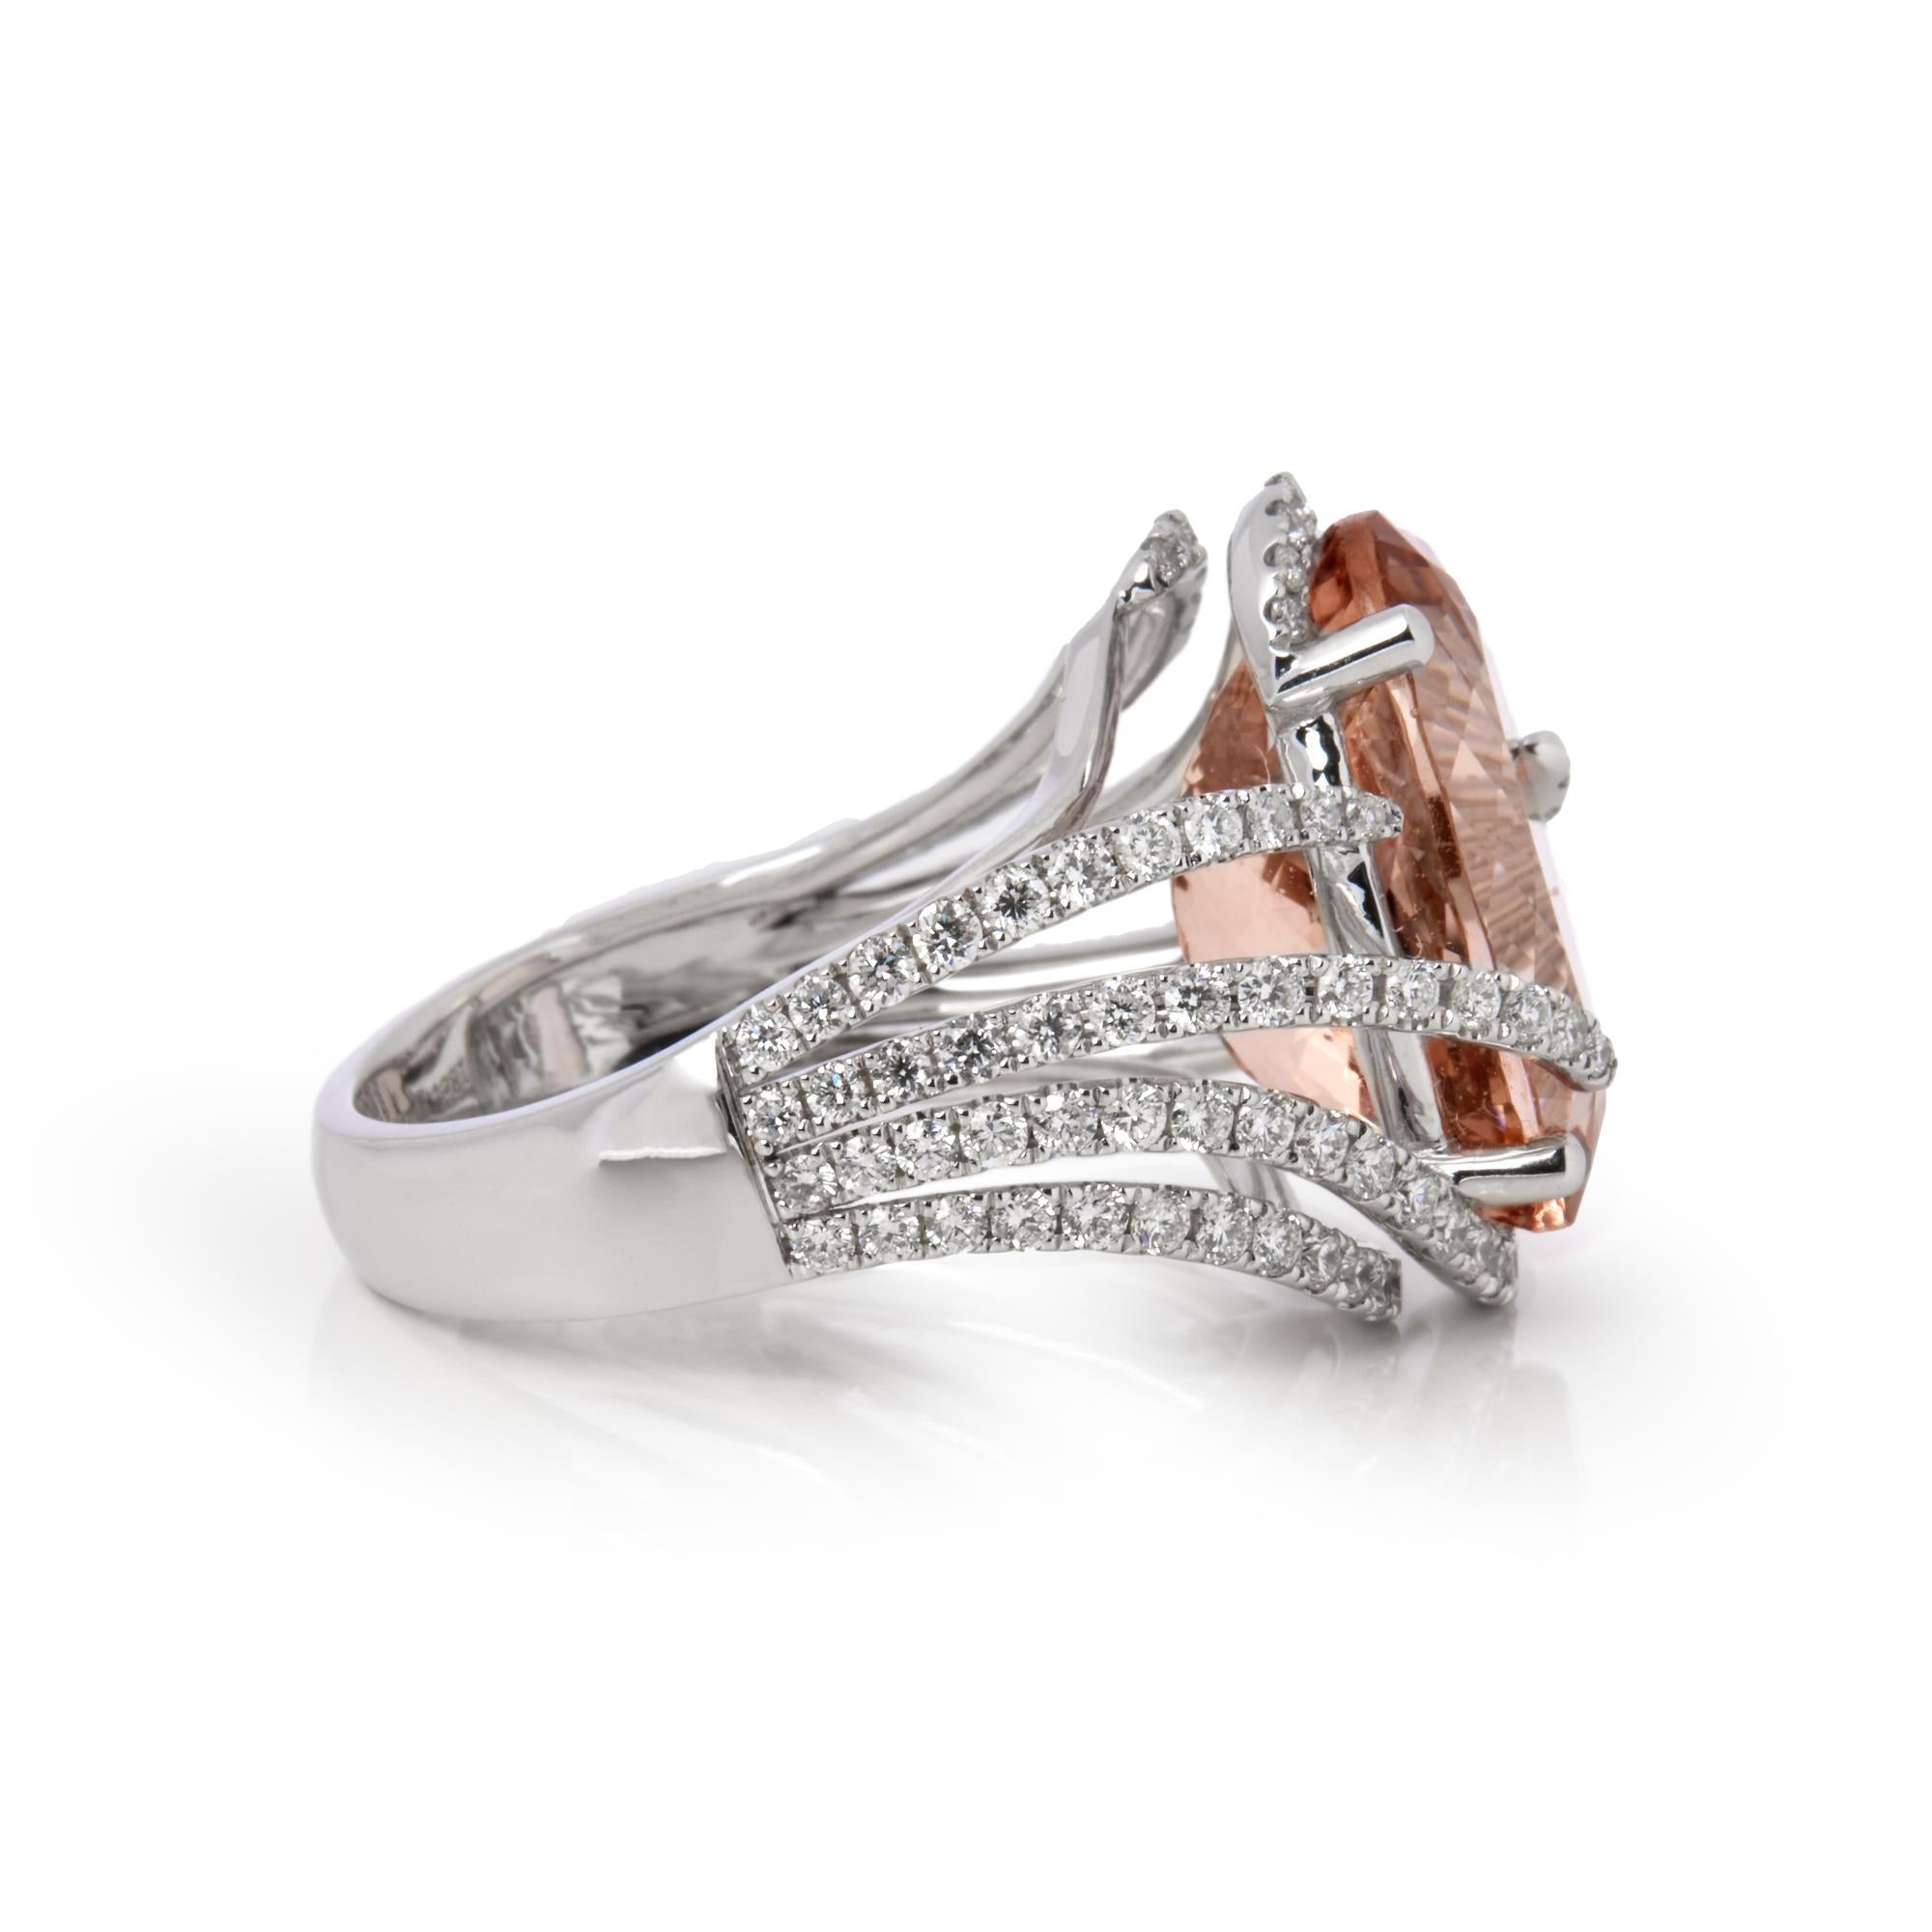 David Jerome Certified 9.12ct Oval Cut Morganite and Diamond Ring In New Condition For Sale In Bishop's Stortford, Hertfordshire